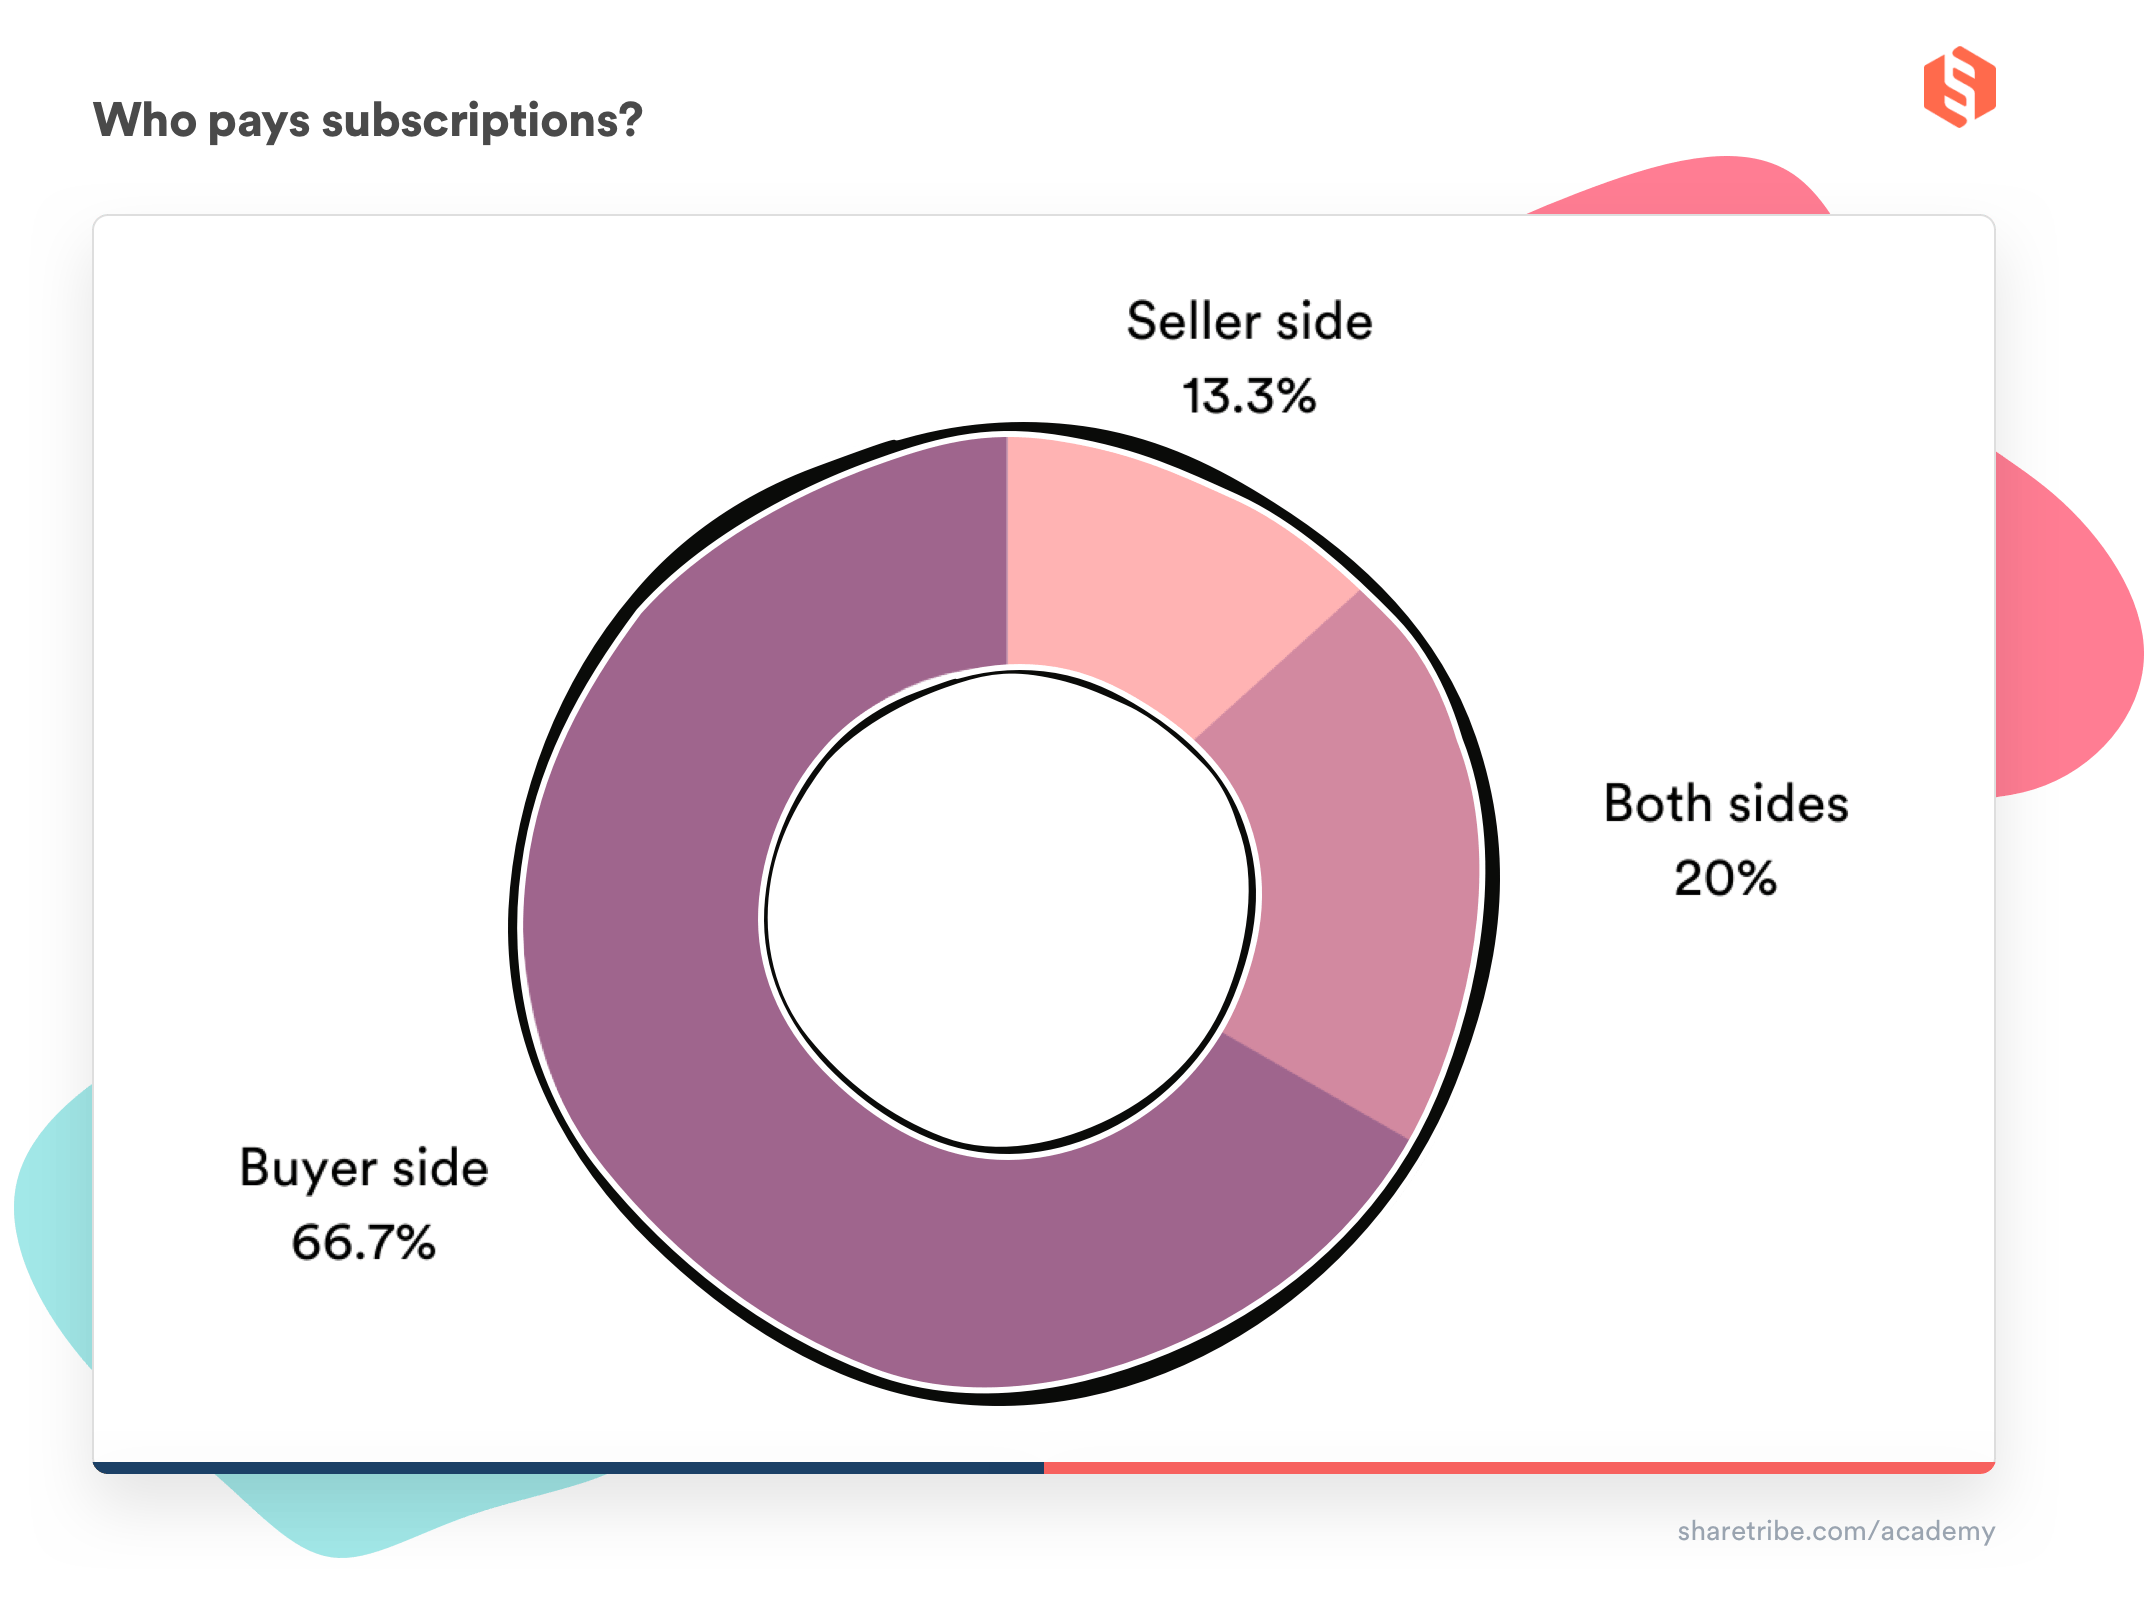 A donut chart on who pays subscriptions